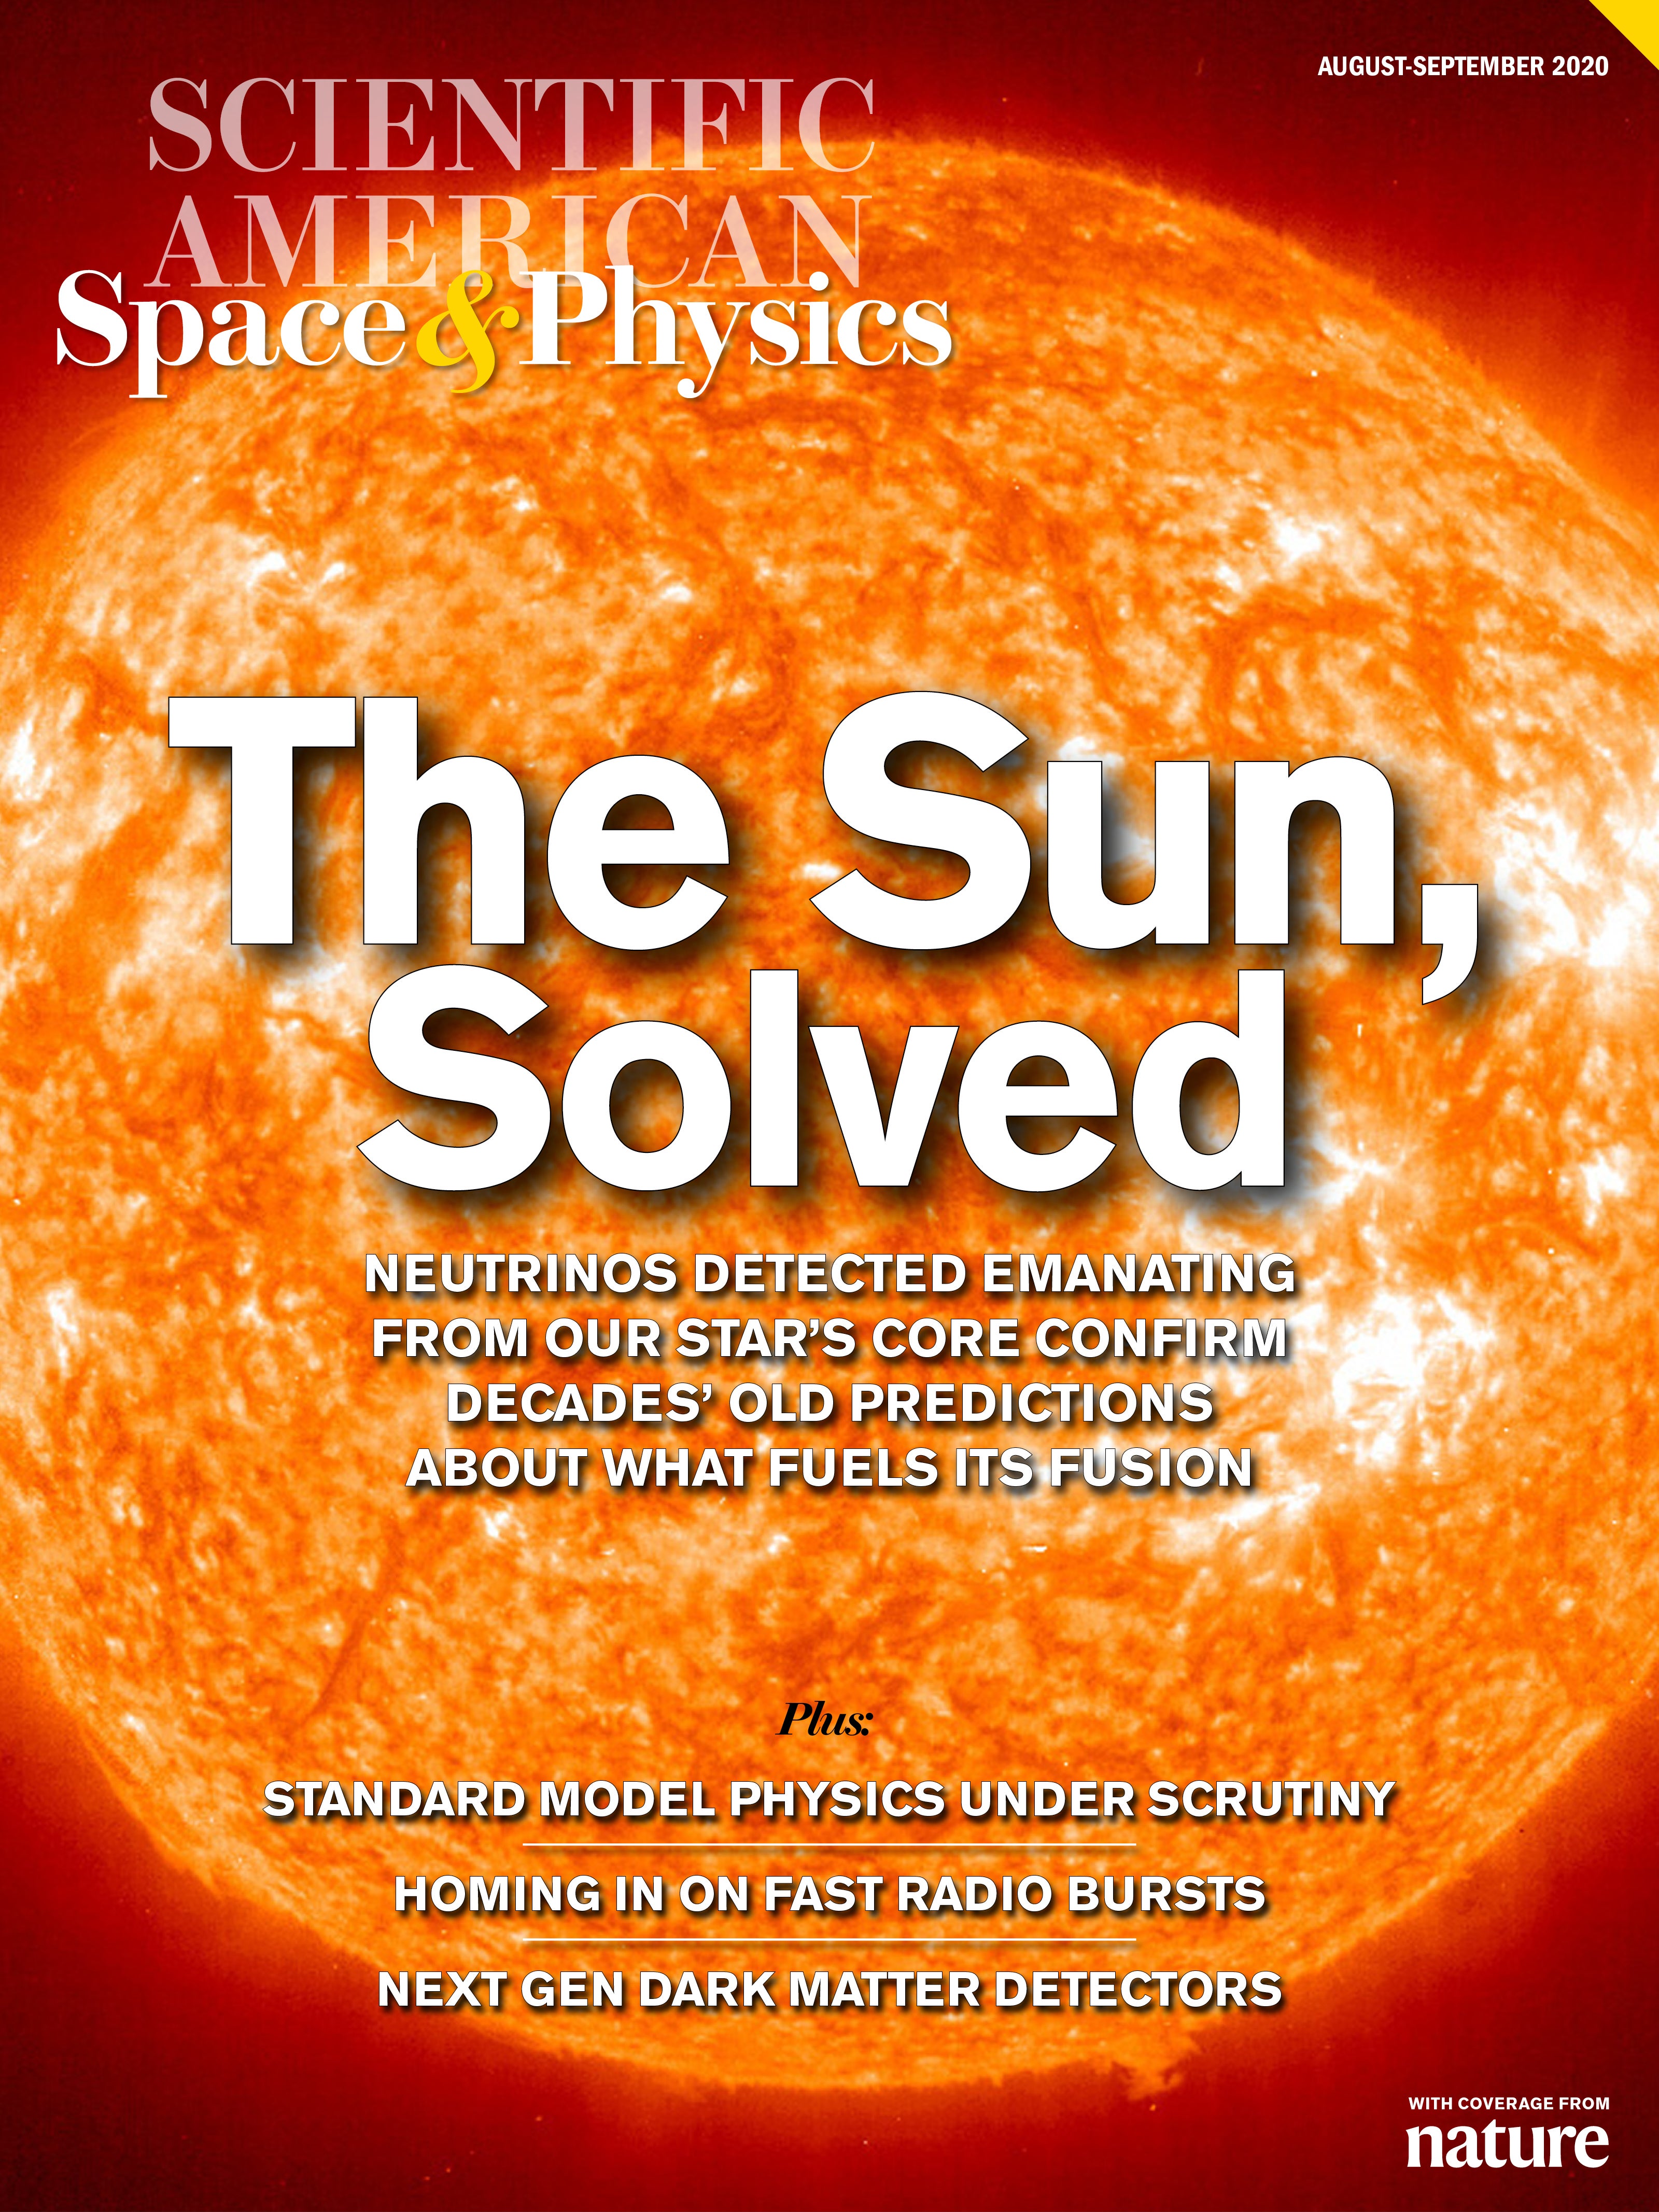 Scientific American Space & Physics, The Sun, Solved